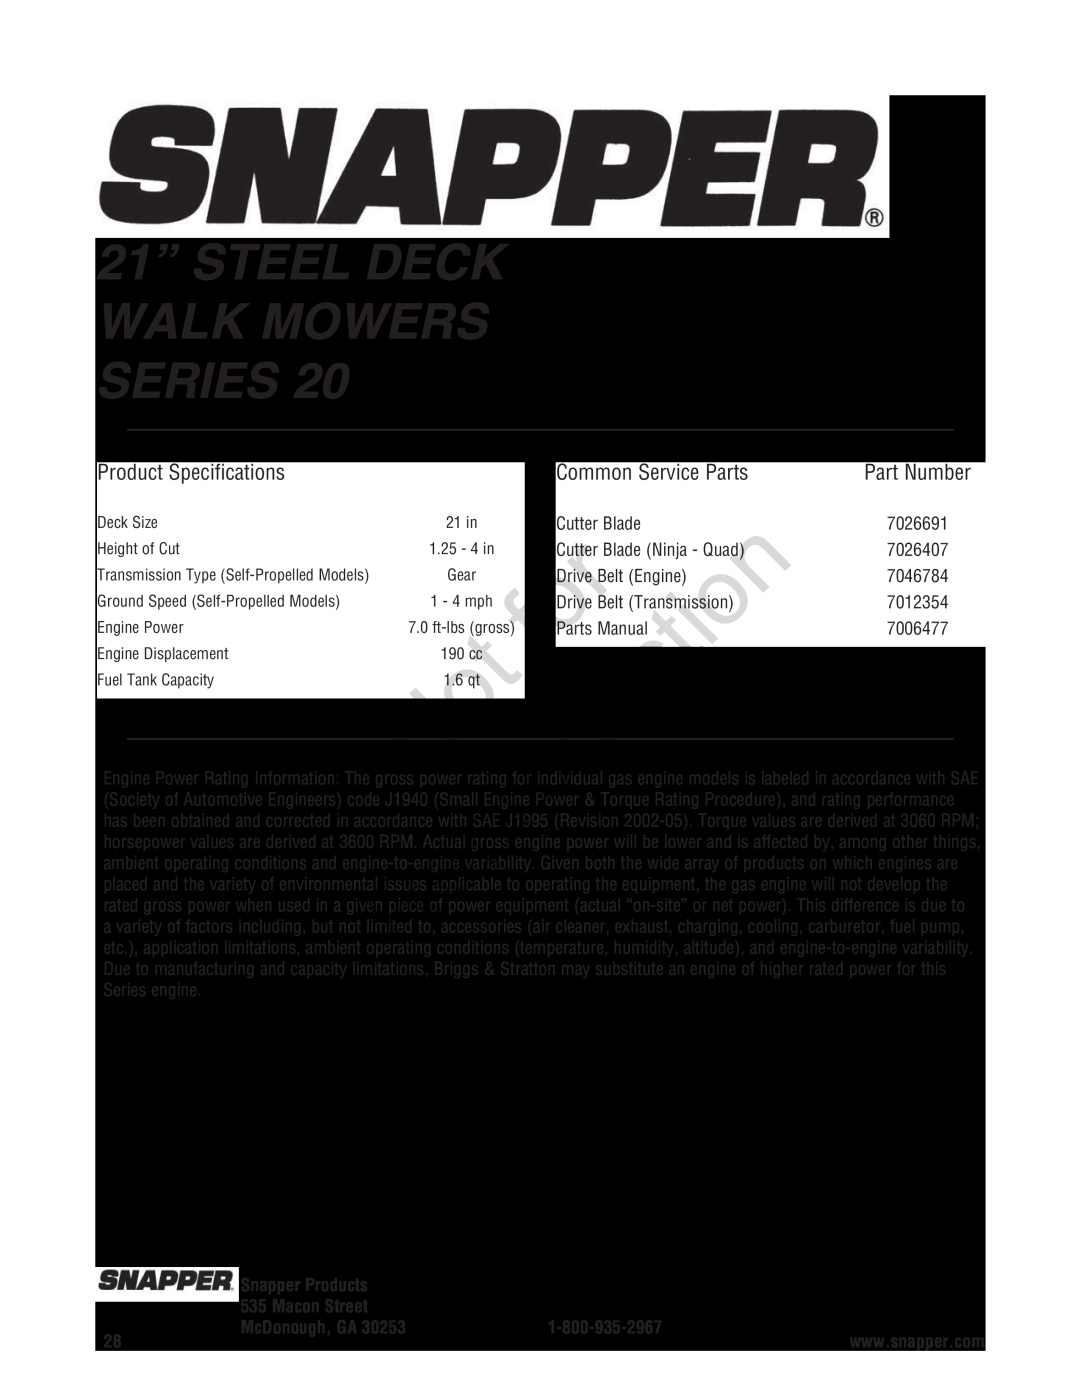 Snapper 7800597, 7800600 21” STEEL DECK WALK MOWERS SERIES, Product Specifications, Common Service Parts, Part Number 